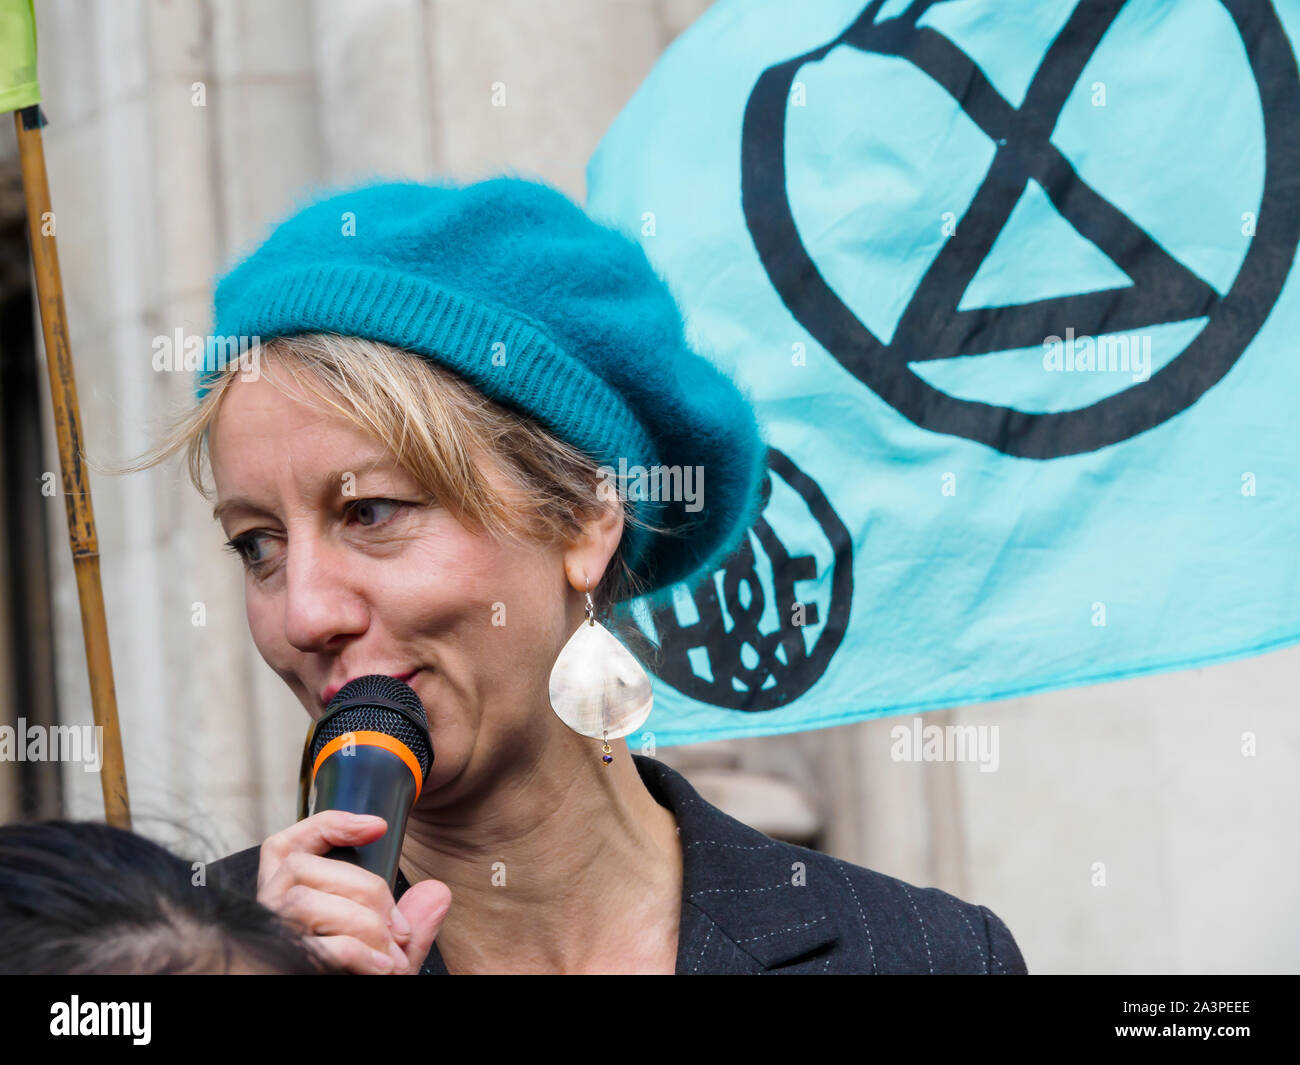 London, UK. 9th October 2019. Gail Bradbrook, co-founder of Extinction Rebellion speaks. As a part of Extinction Rebellion’s International Rebellion, Lawyers for XR read a declaration of rebellion against a legal system which is failing in its ultimate purpose of protecting and enriching life. They call for deep and urgent changes in our legal system to deal with climate justice and ecological collapse and provide true justice for all. Credit: Peter Marshall/Alamy Live News Stock Photo